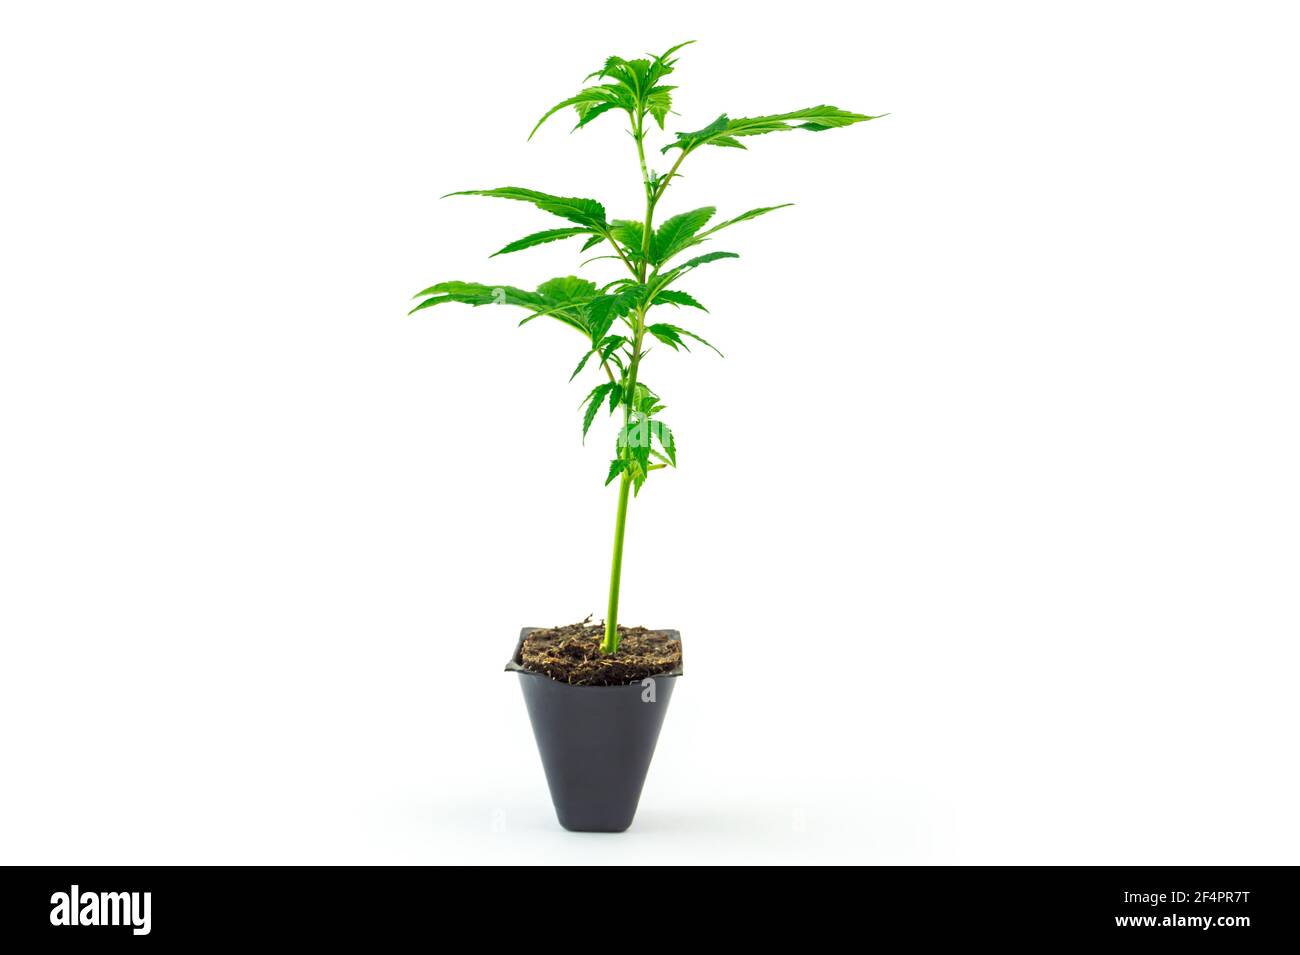 Cannabis clone Girl scout cookies strain seedling in pot isolated on white Stock Photo